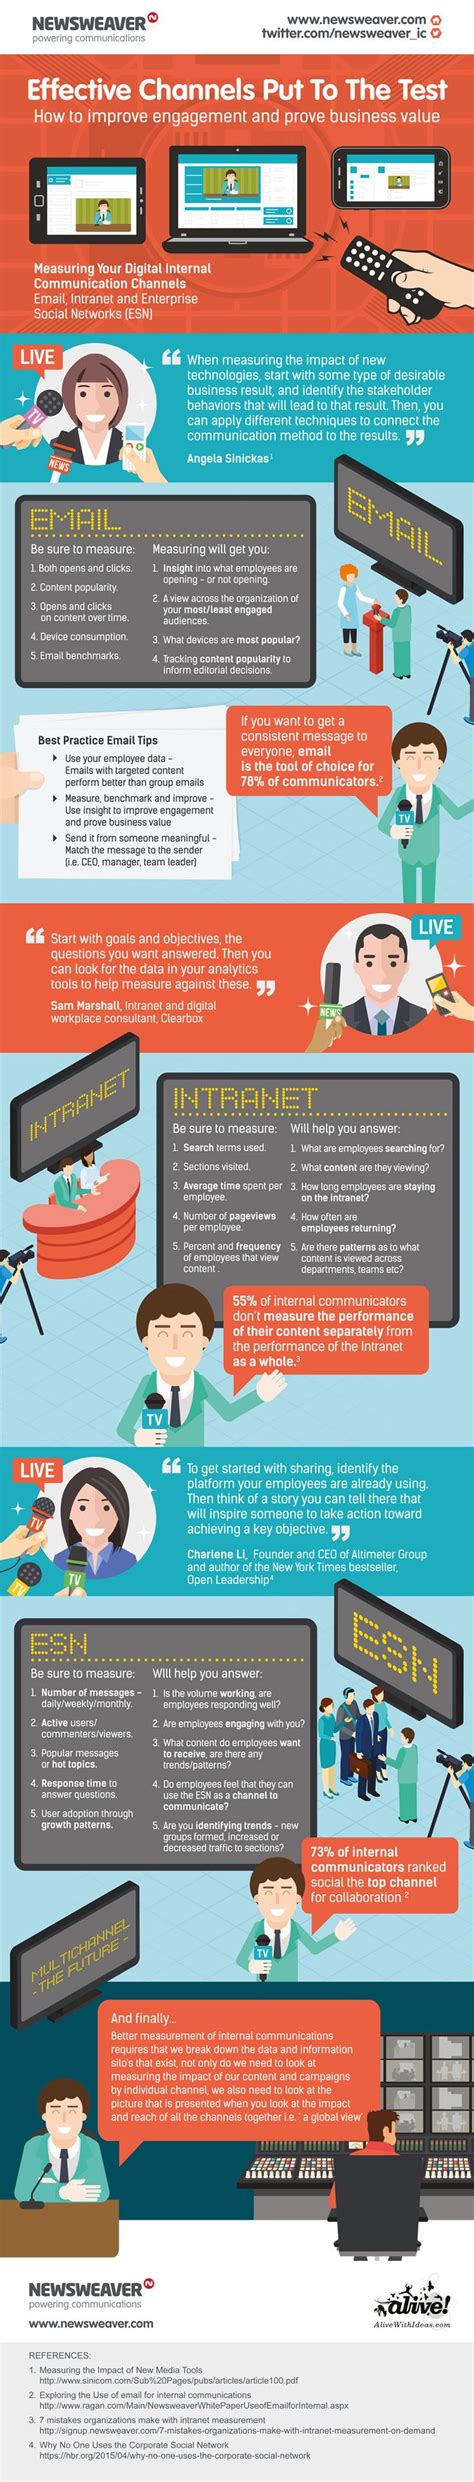 Management Infographic Effective Employee Communication Channels